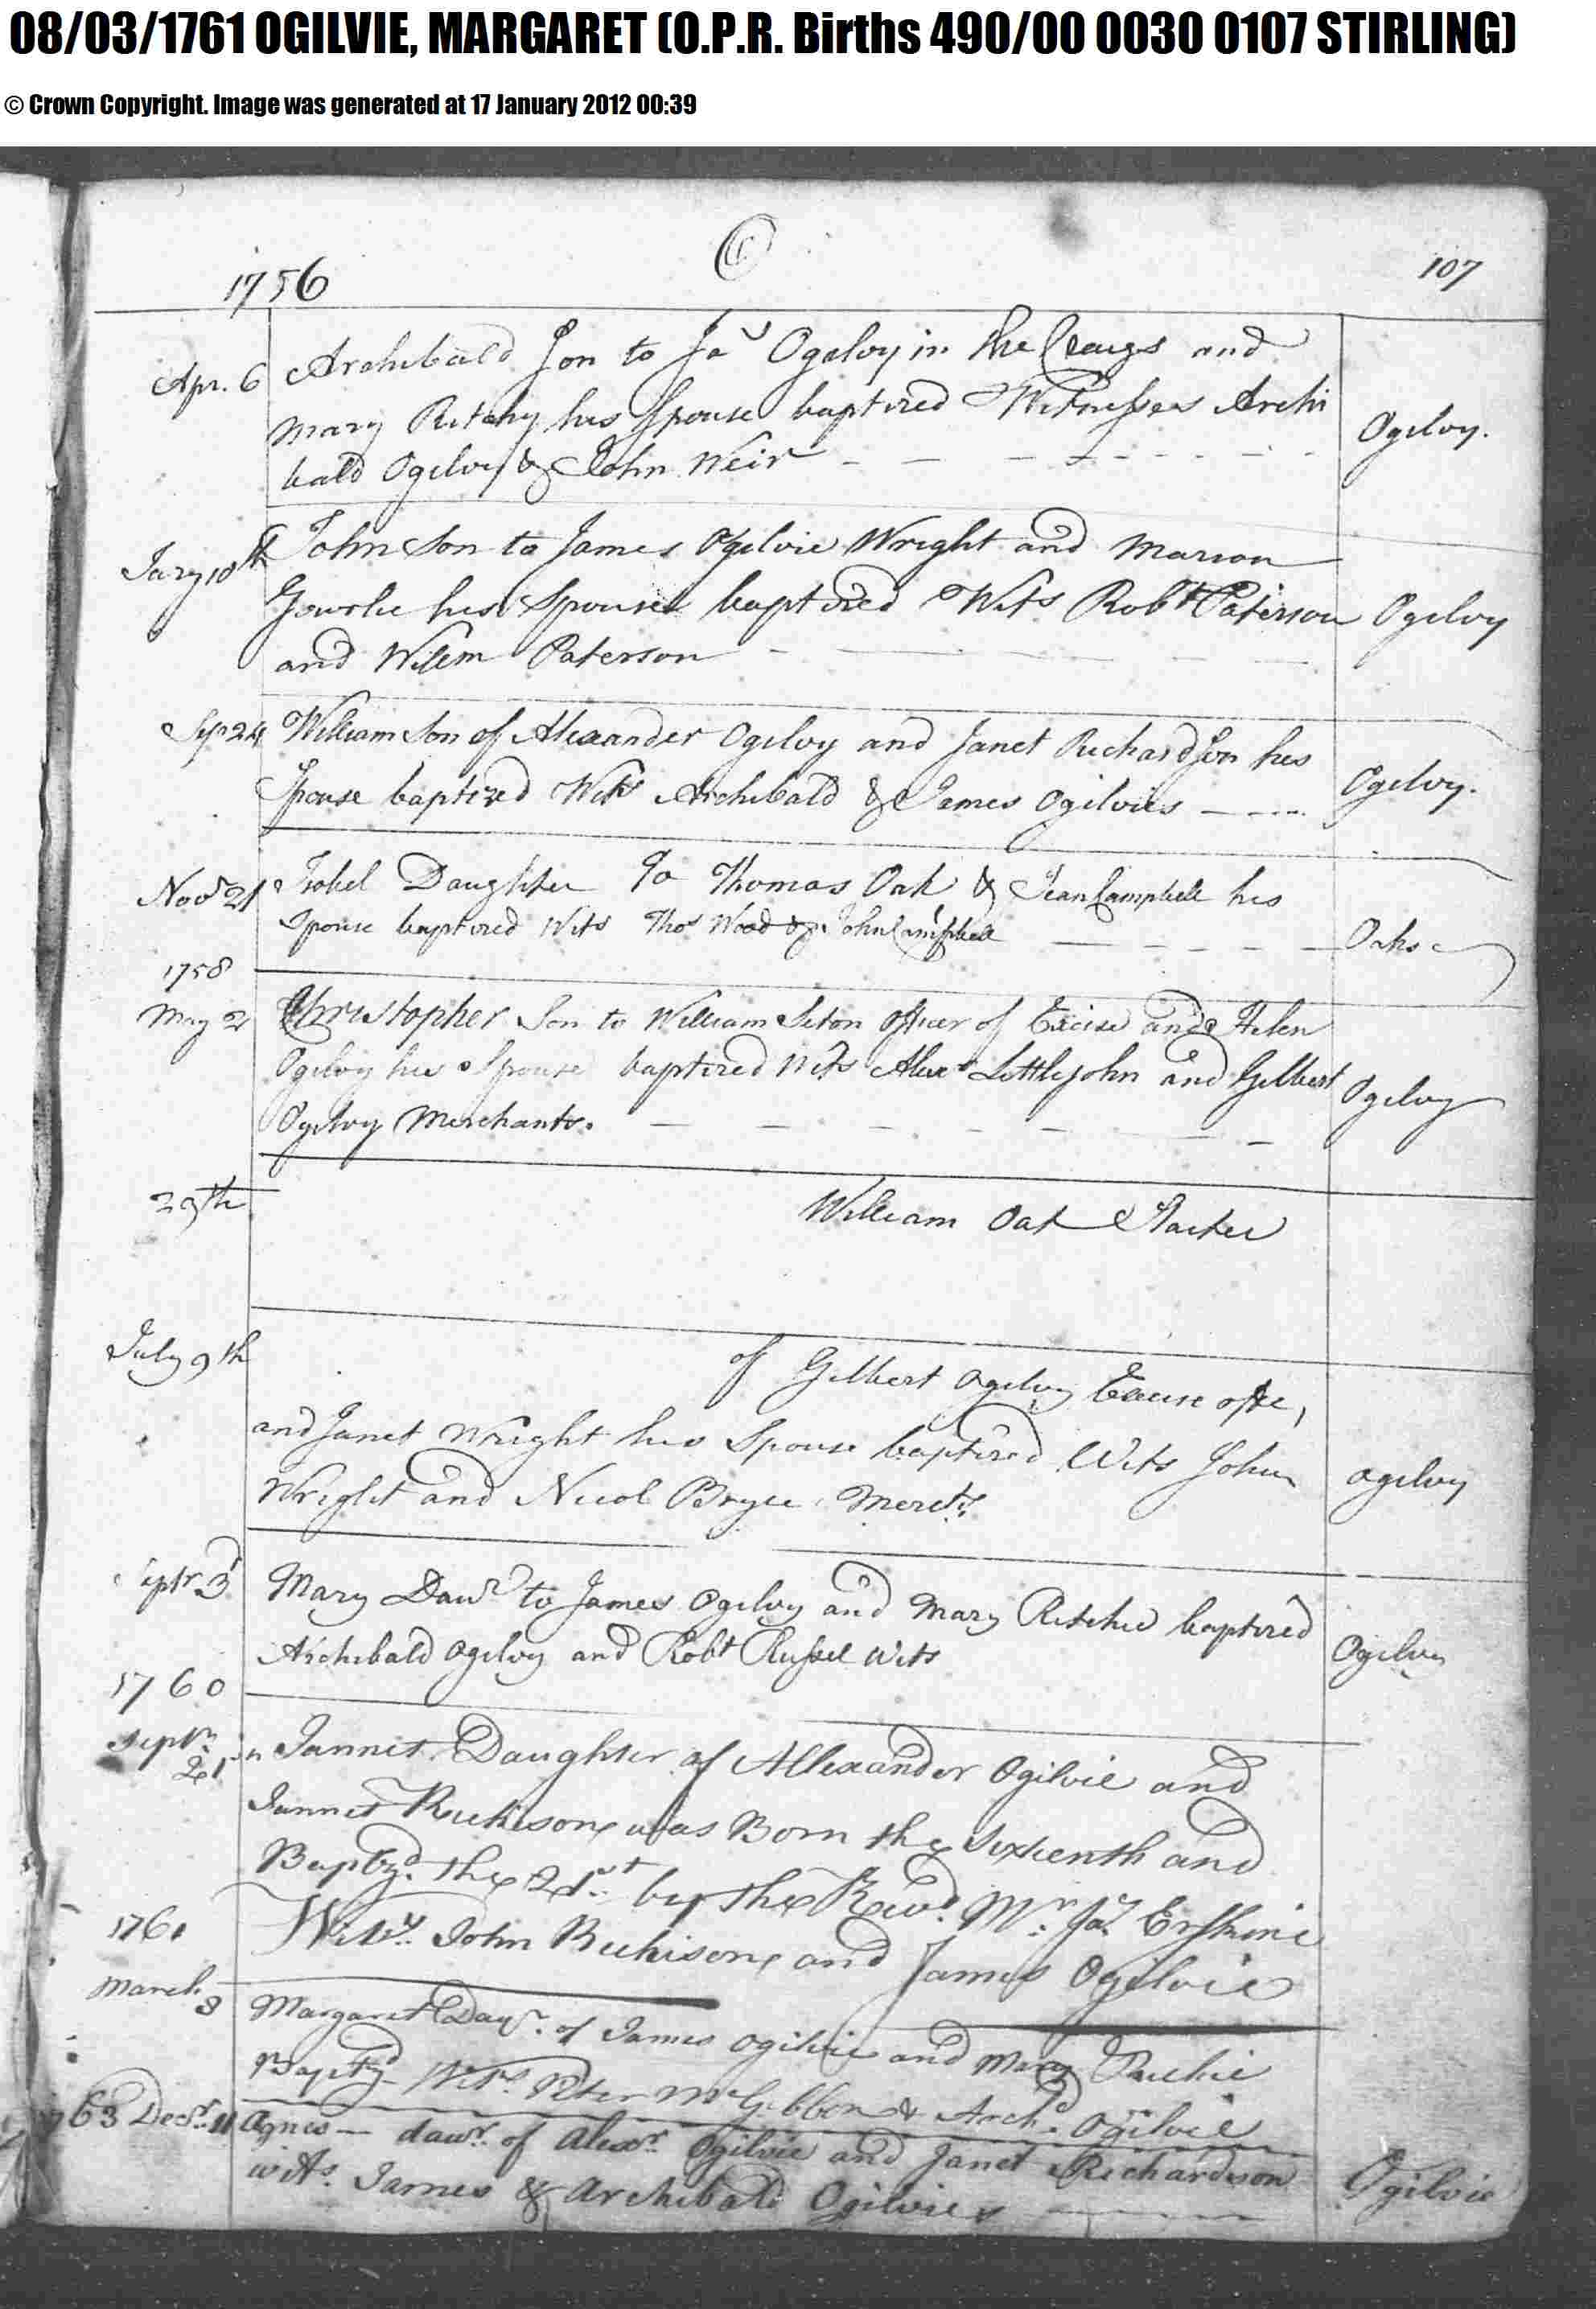 birth certificate – Genealogy and Jure Sanguinis